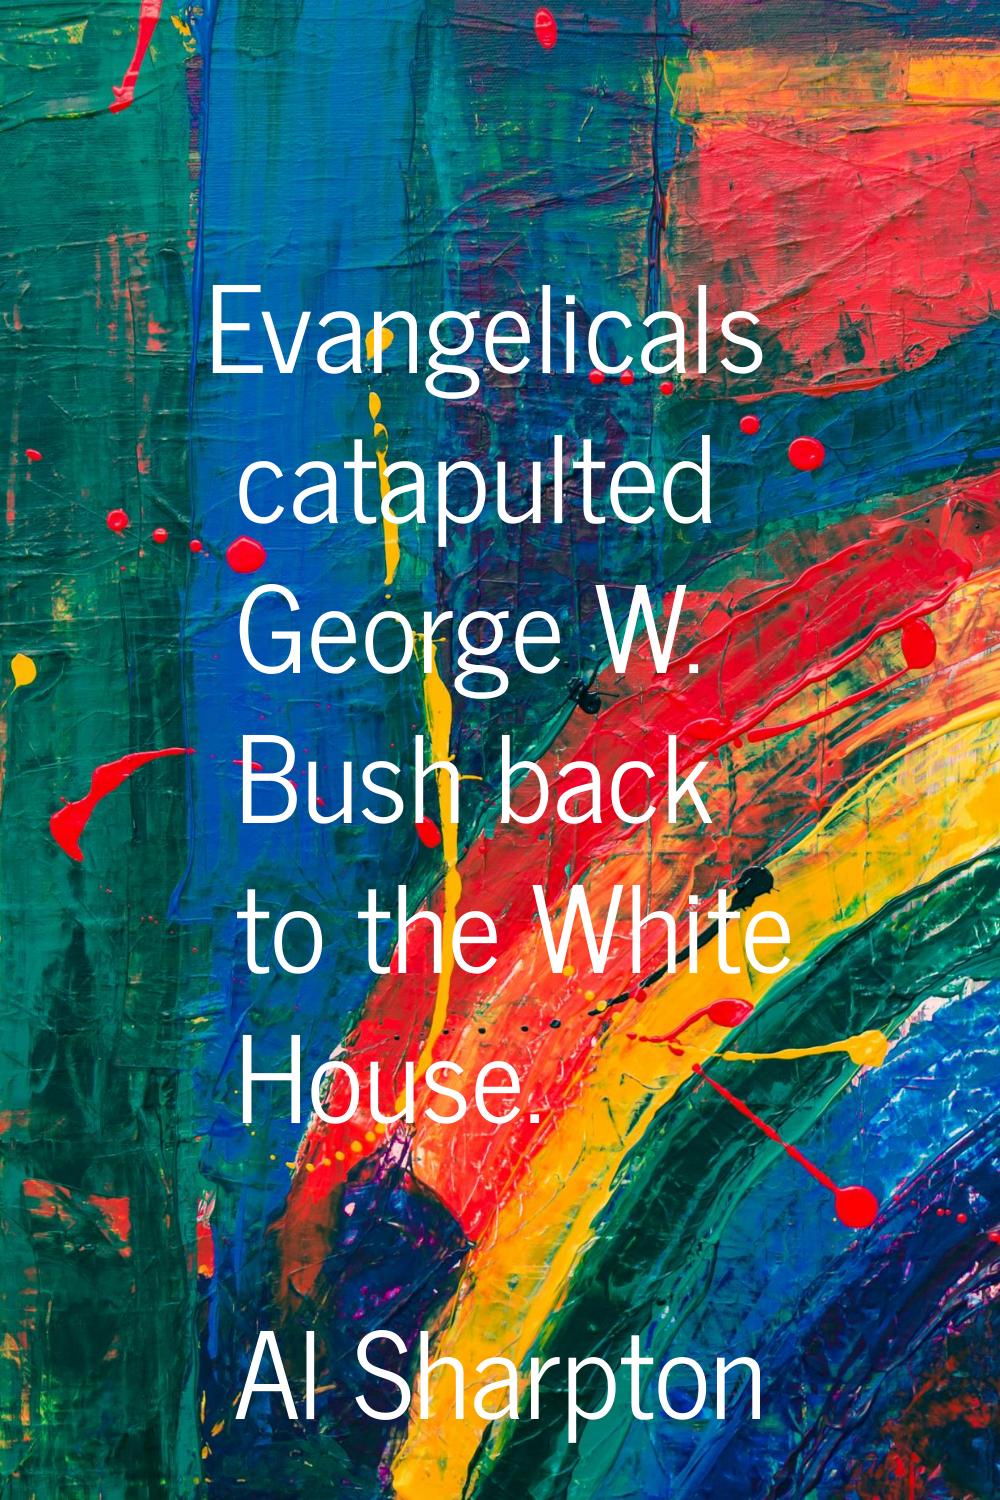 Evangelicals catapulted George W. Bush back to the White House.